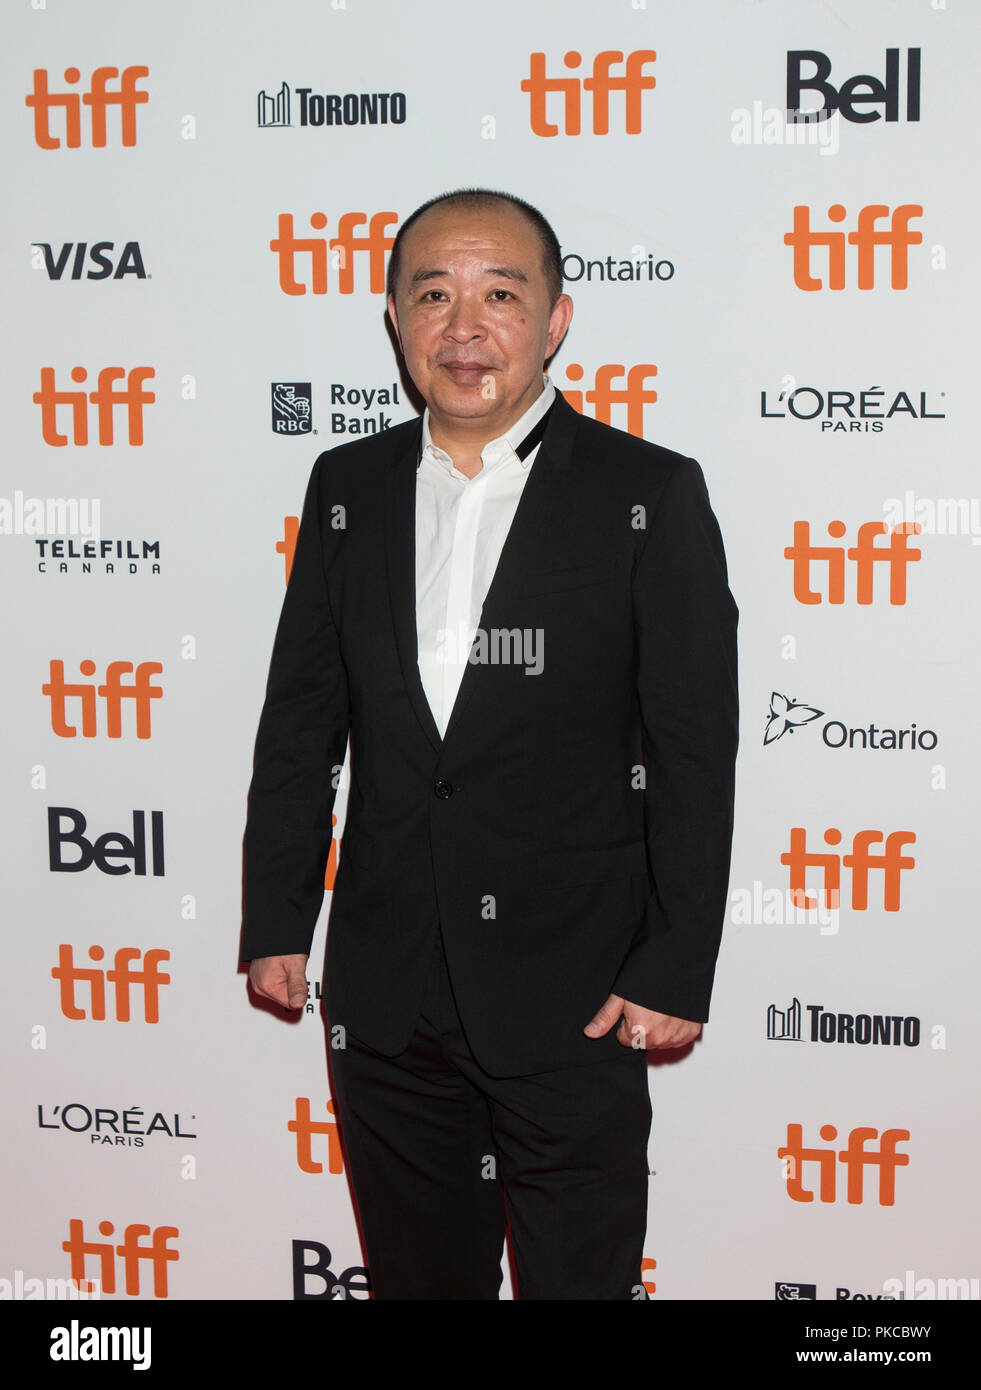 (180913) -- TORONTO, Sept. 13, 2018 (Xinhua) -- Director Liu Jie poses for photos before the world premiere of the film 'Baby' at Ryerson Theatre during the 2018 Toronto International Film Festival in Toronto, Canada, Sept. 12, 2018. (Xinhua/Zou Zheng) (dtf) Stock Photo